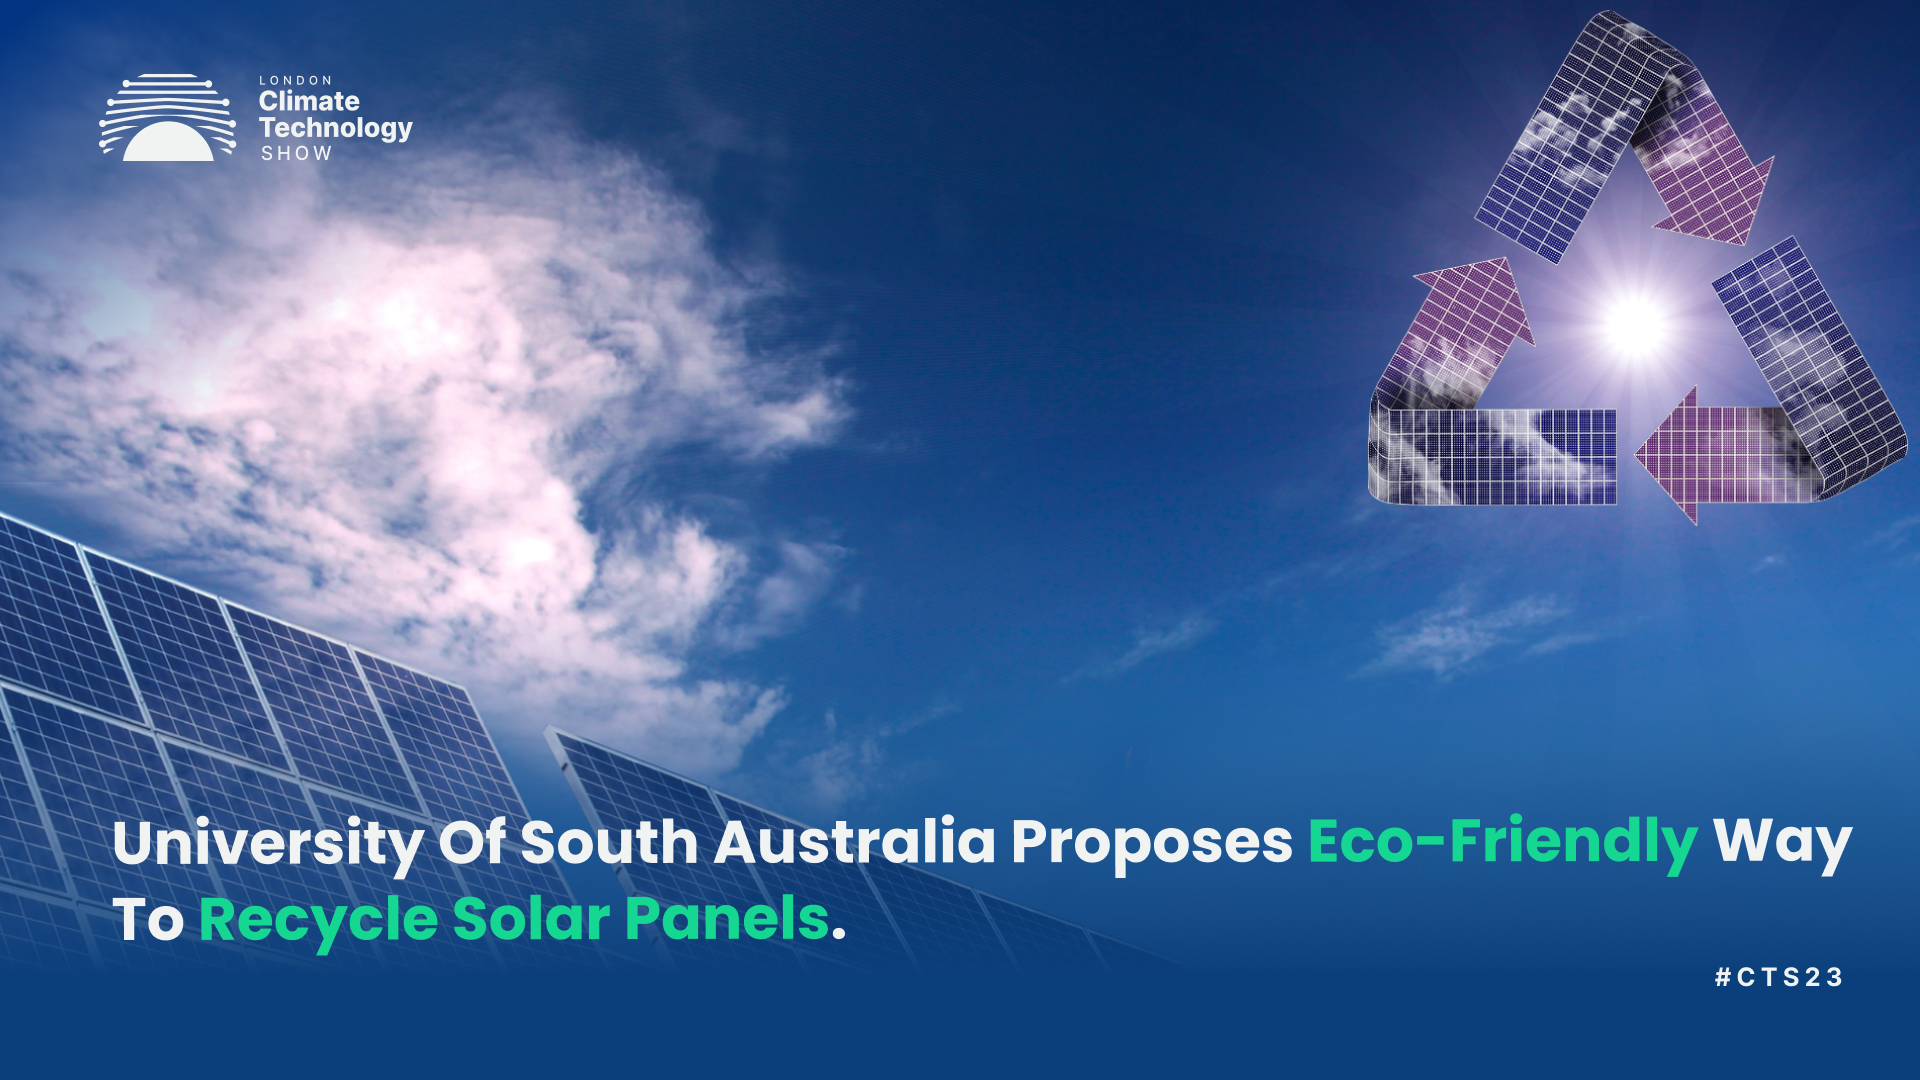 University Of South Australia Proposes Eco-Friendly Way To Recycle Solar Panels.